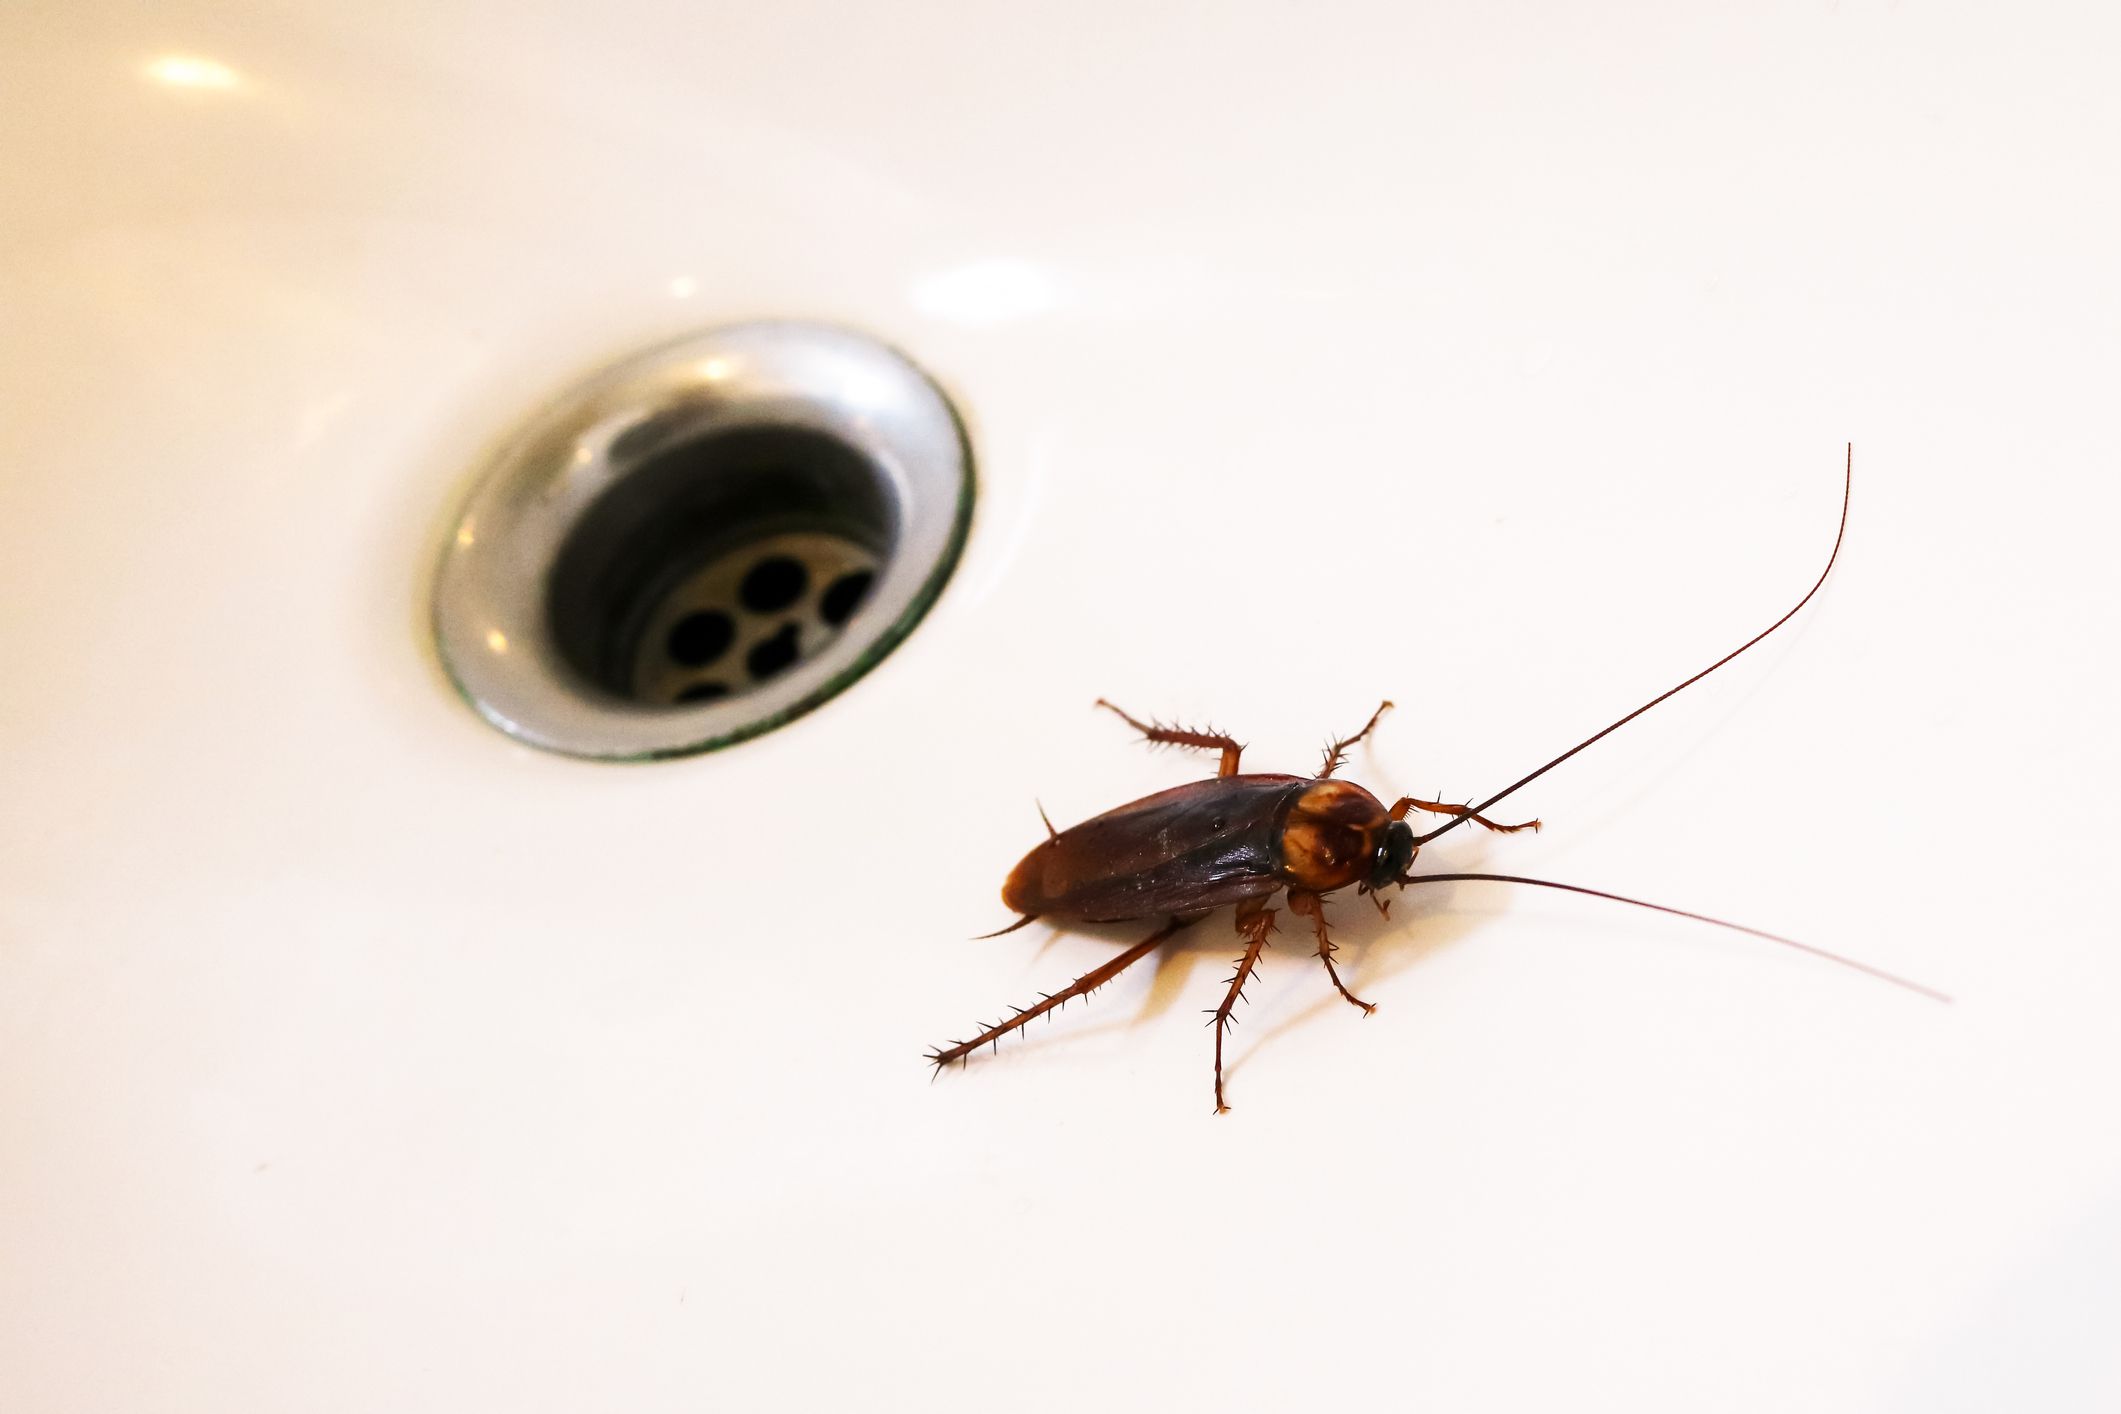 How to Get Rid of Roaches - How to Kill Cockroaches and Stop an ...